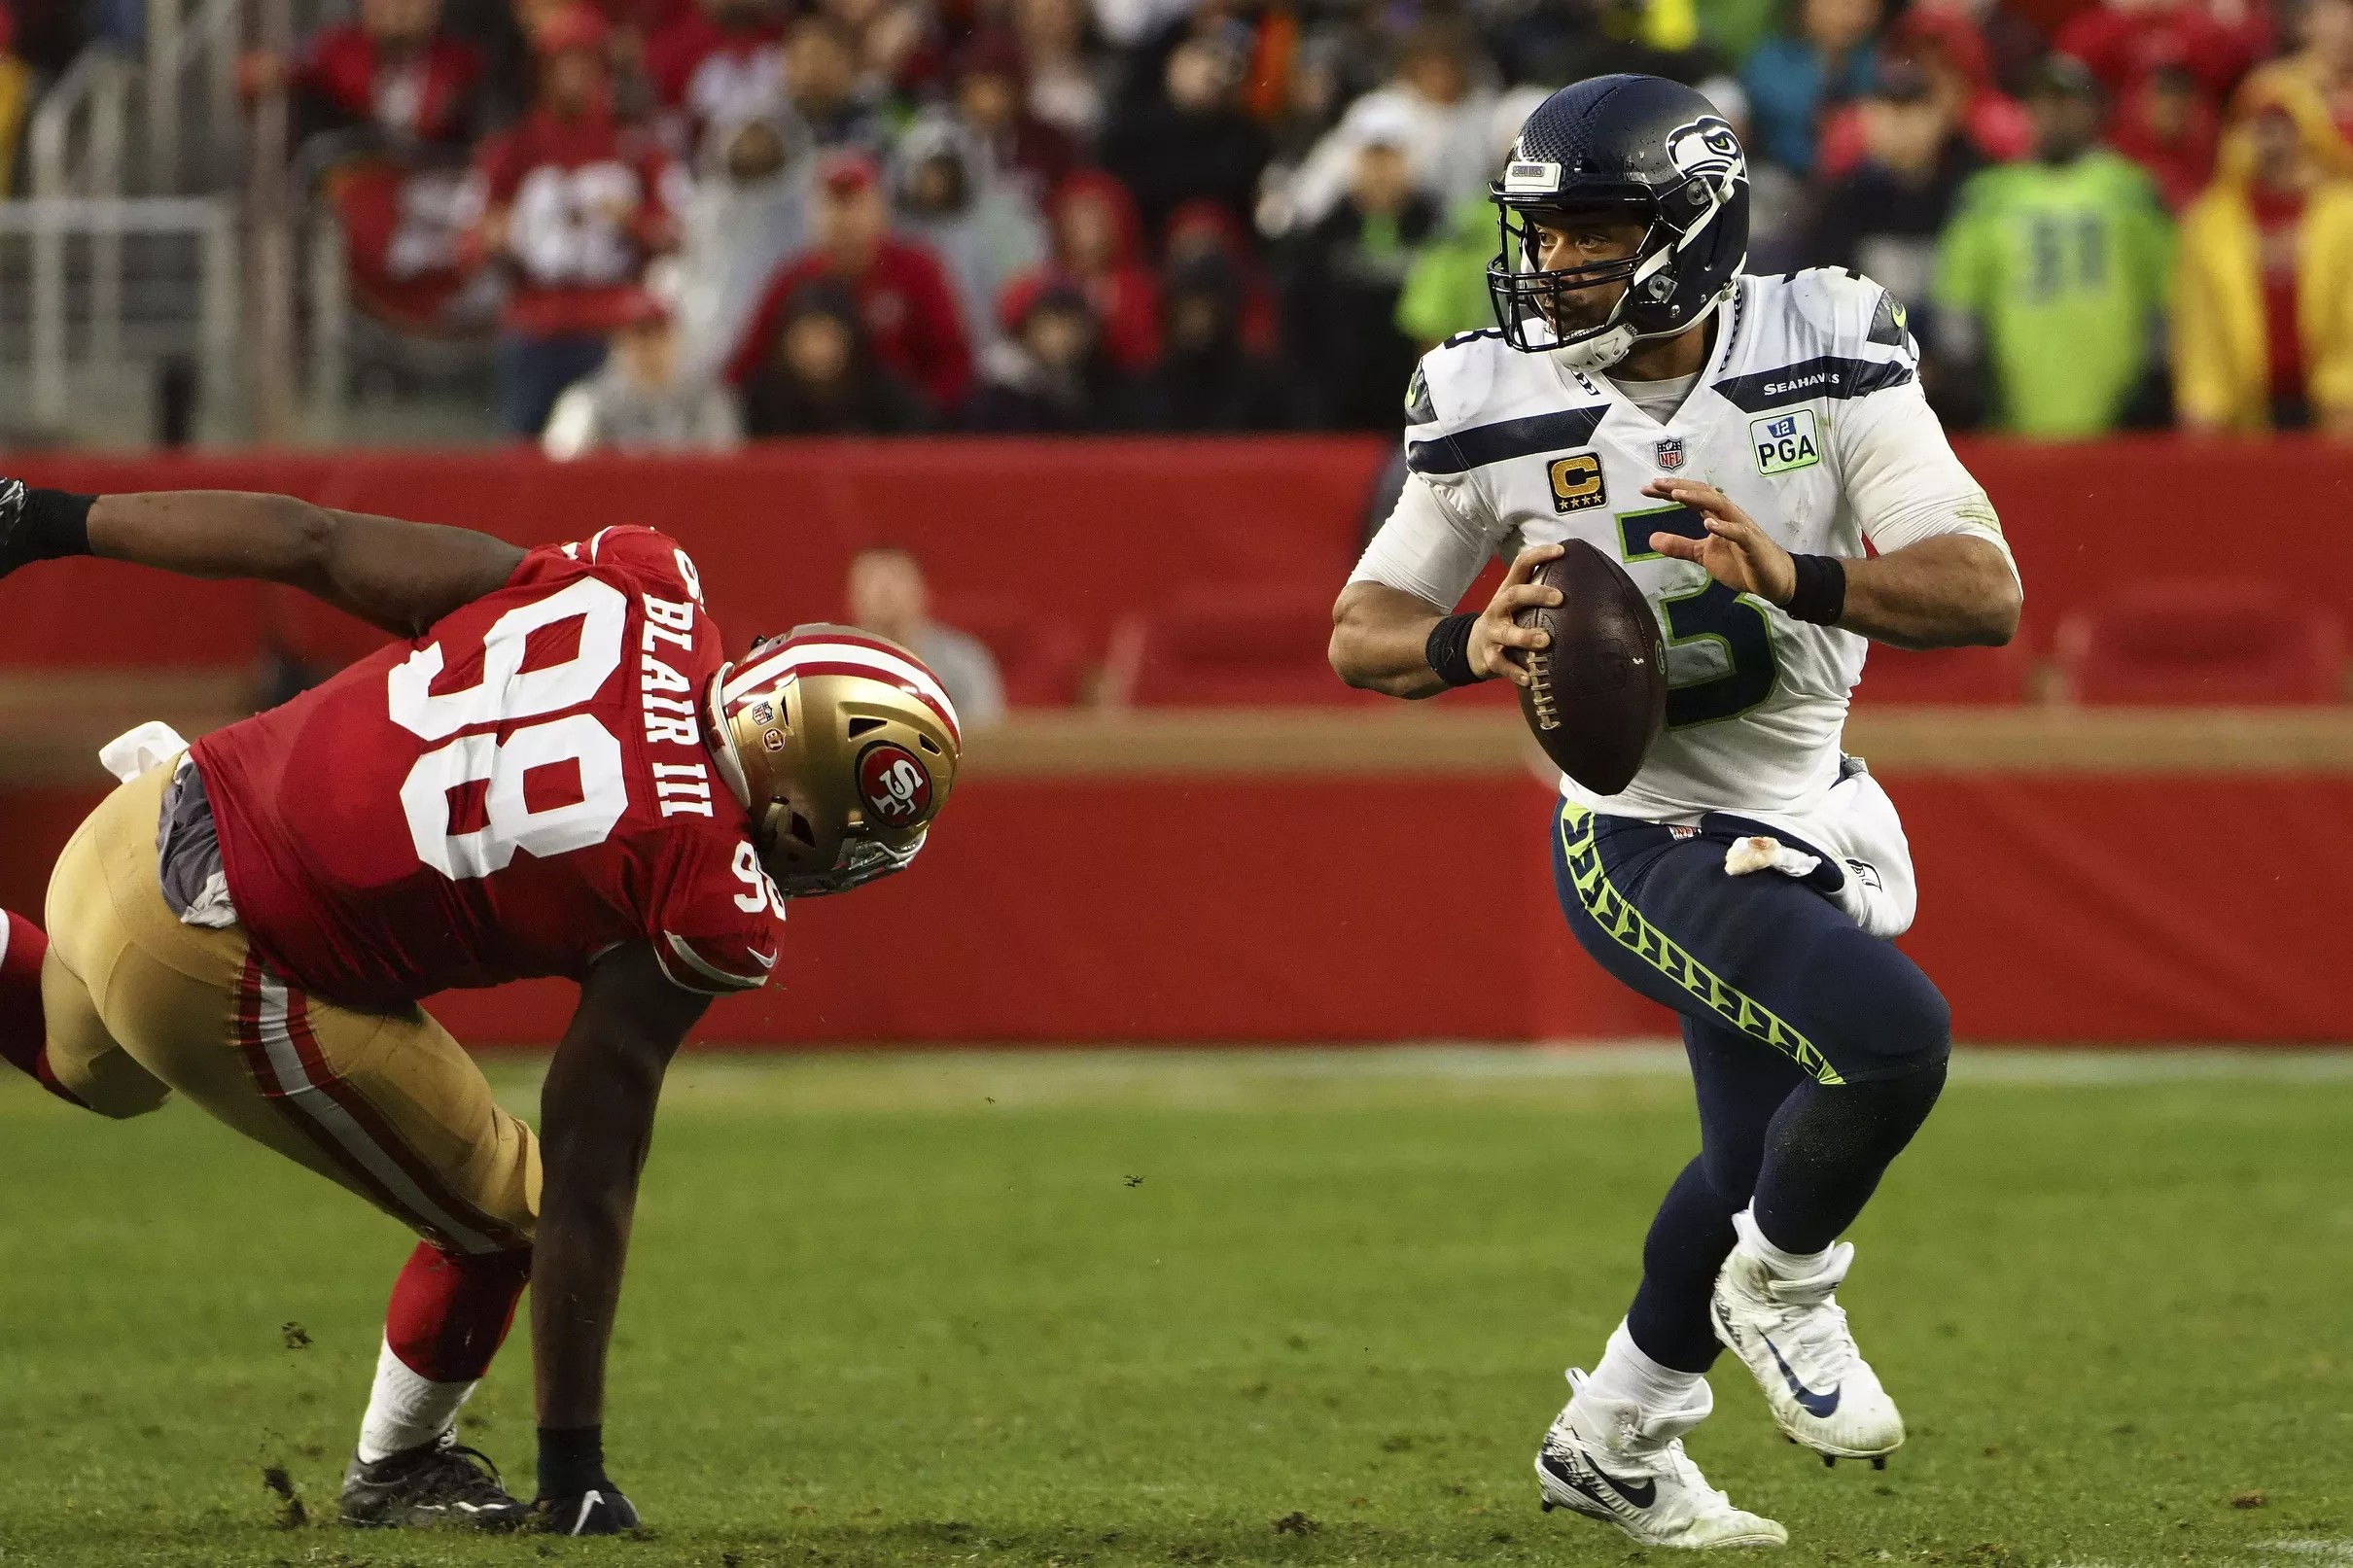 Seahawks vs. 49ers: Kickoff time, TV coverage, radio, live streaming, tickets, and more